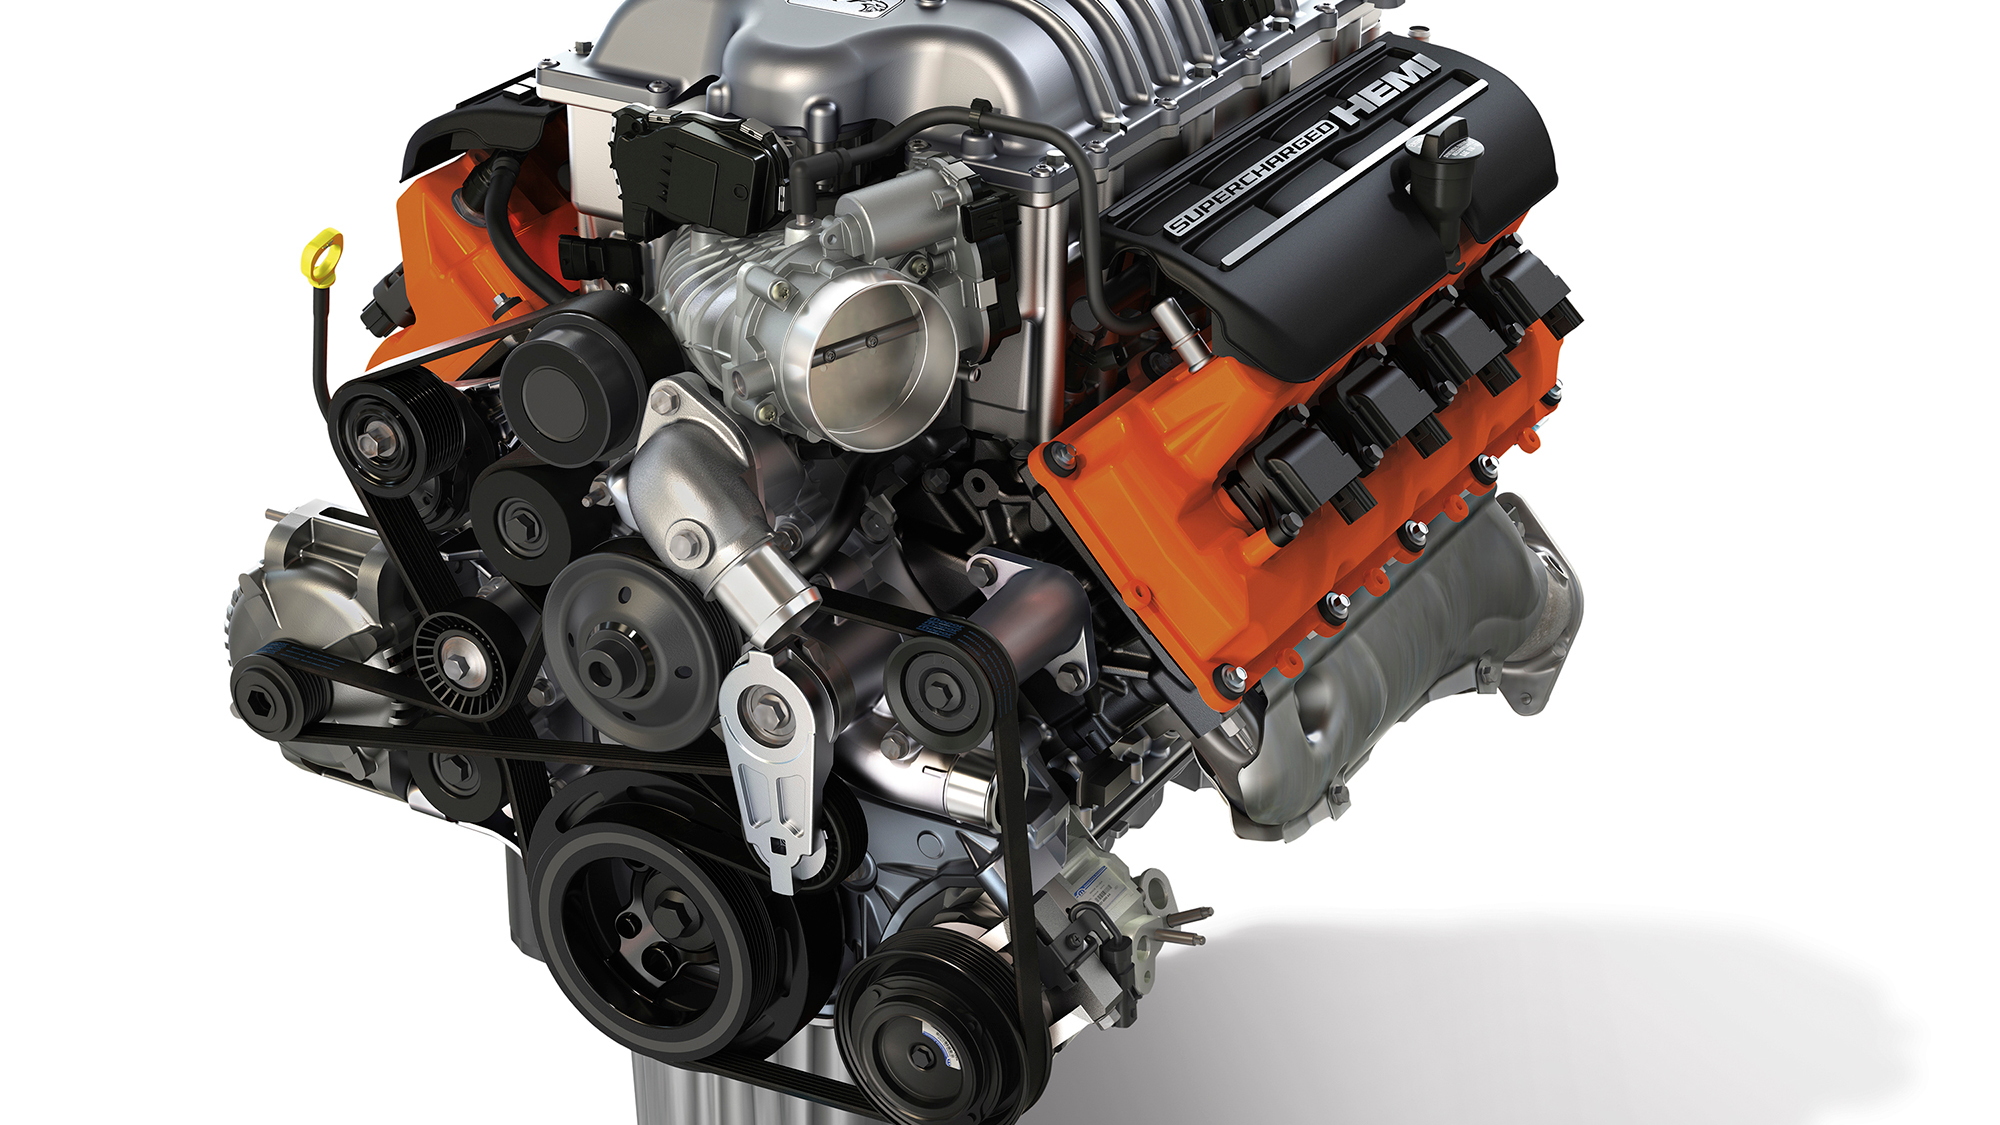 Mopar unleashes its Hellcrate; Hellcat crate engine kit